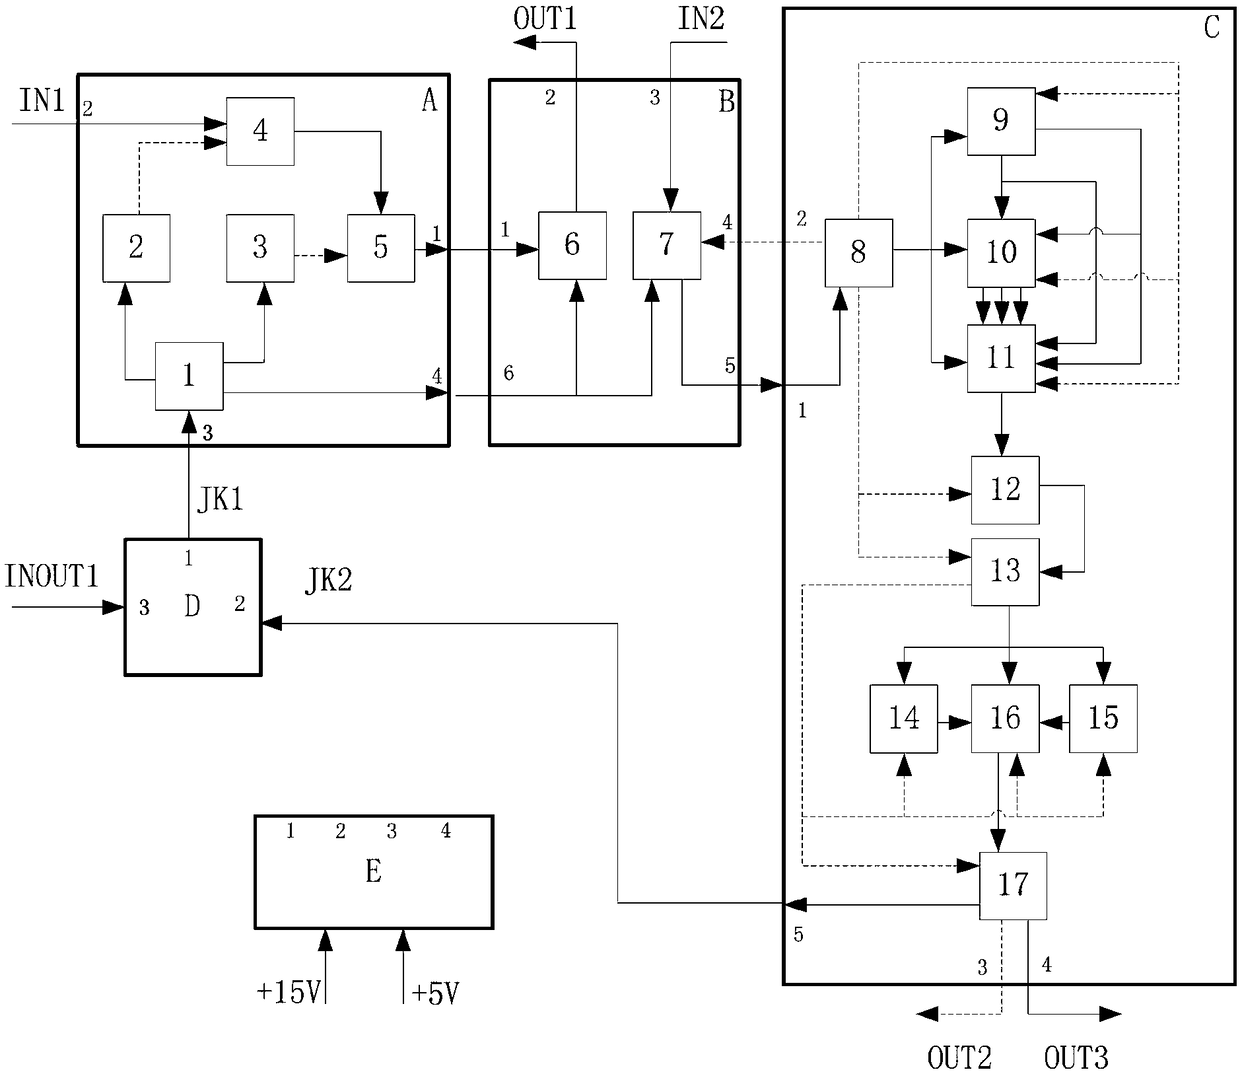 An incoherent spread spectrum communication apparatus with variable data rate